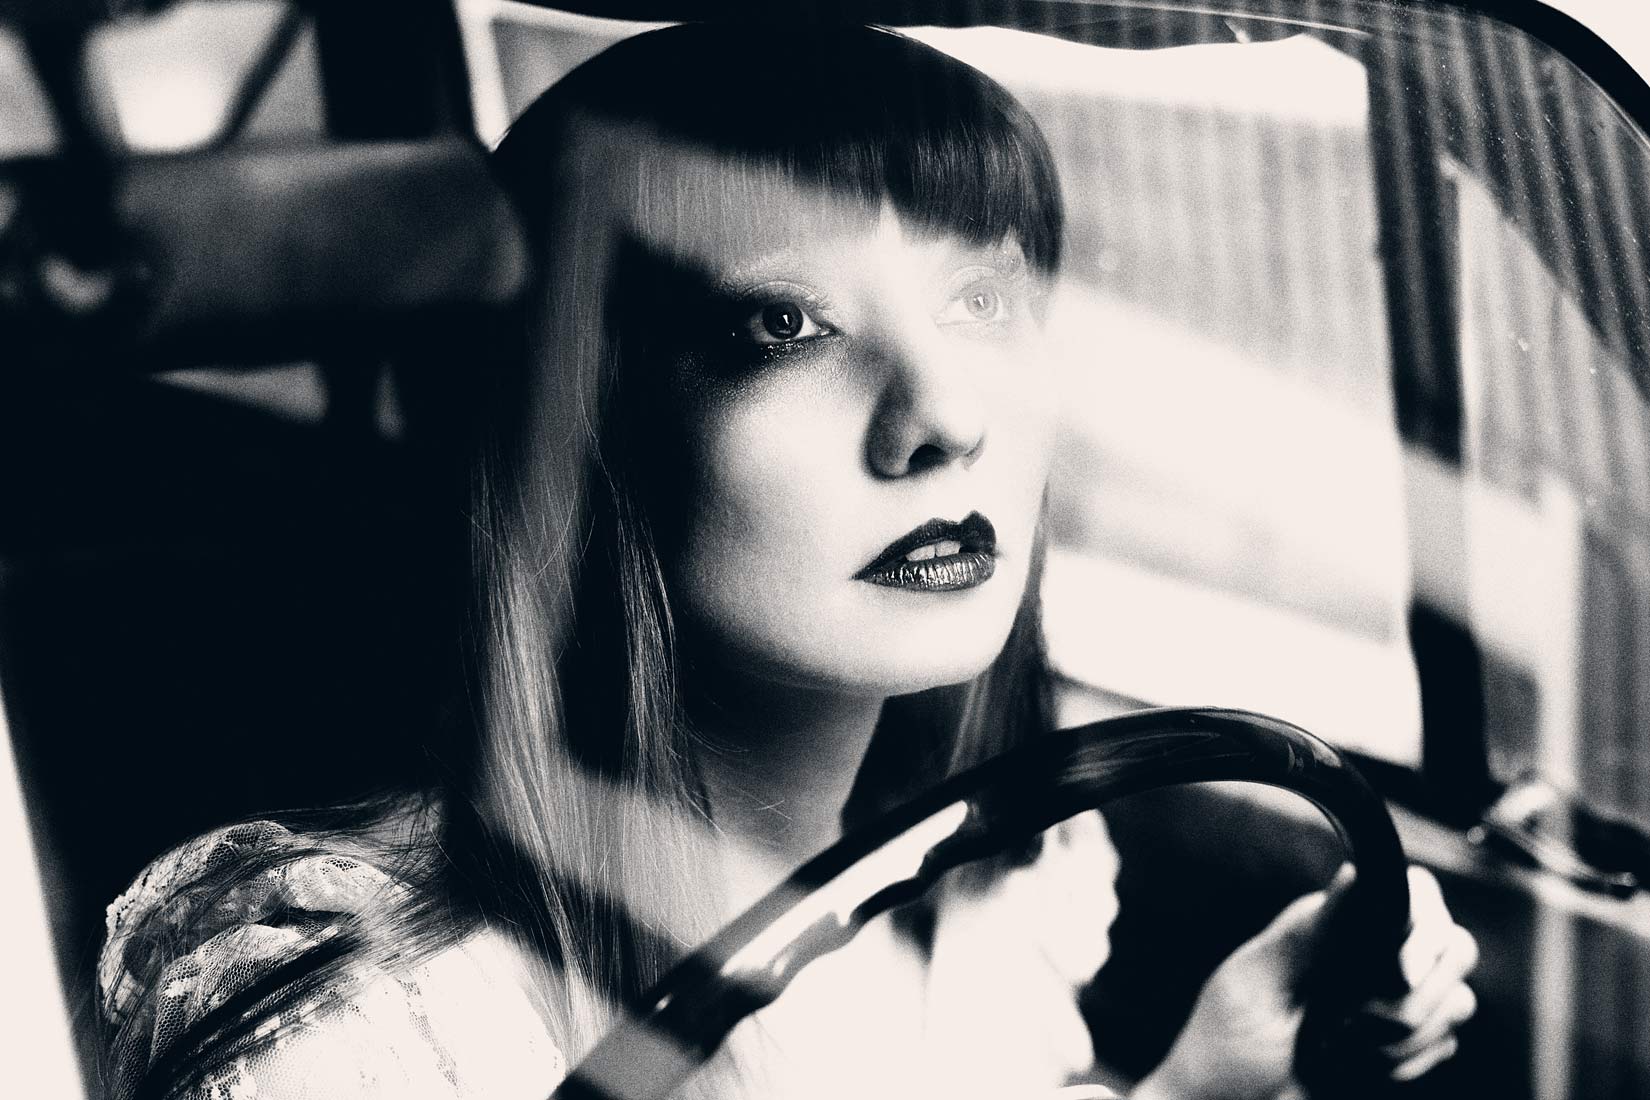 Editorial photography Portland - looking into the windshield of a woman driving